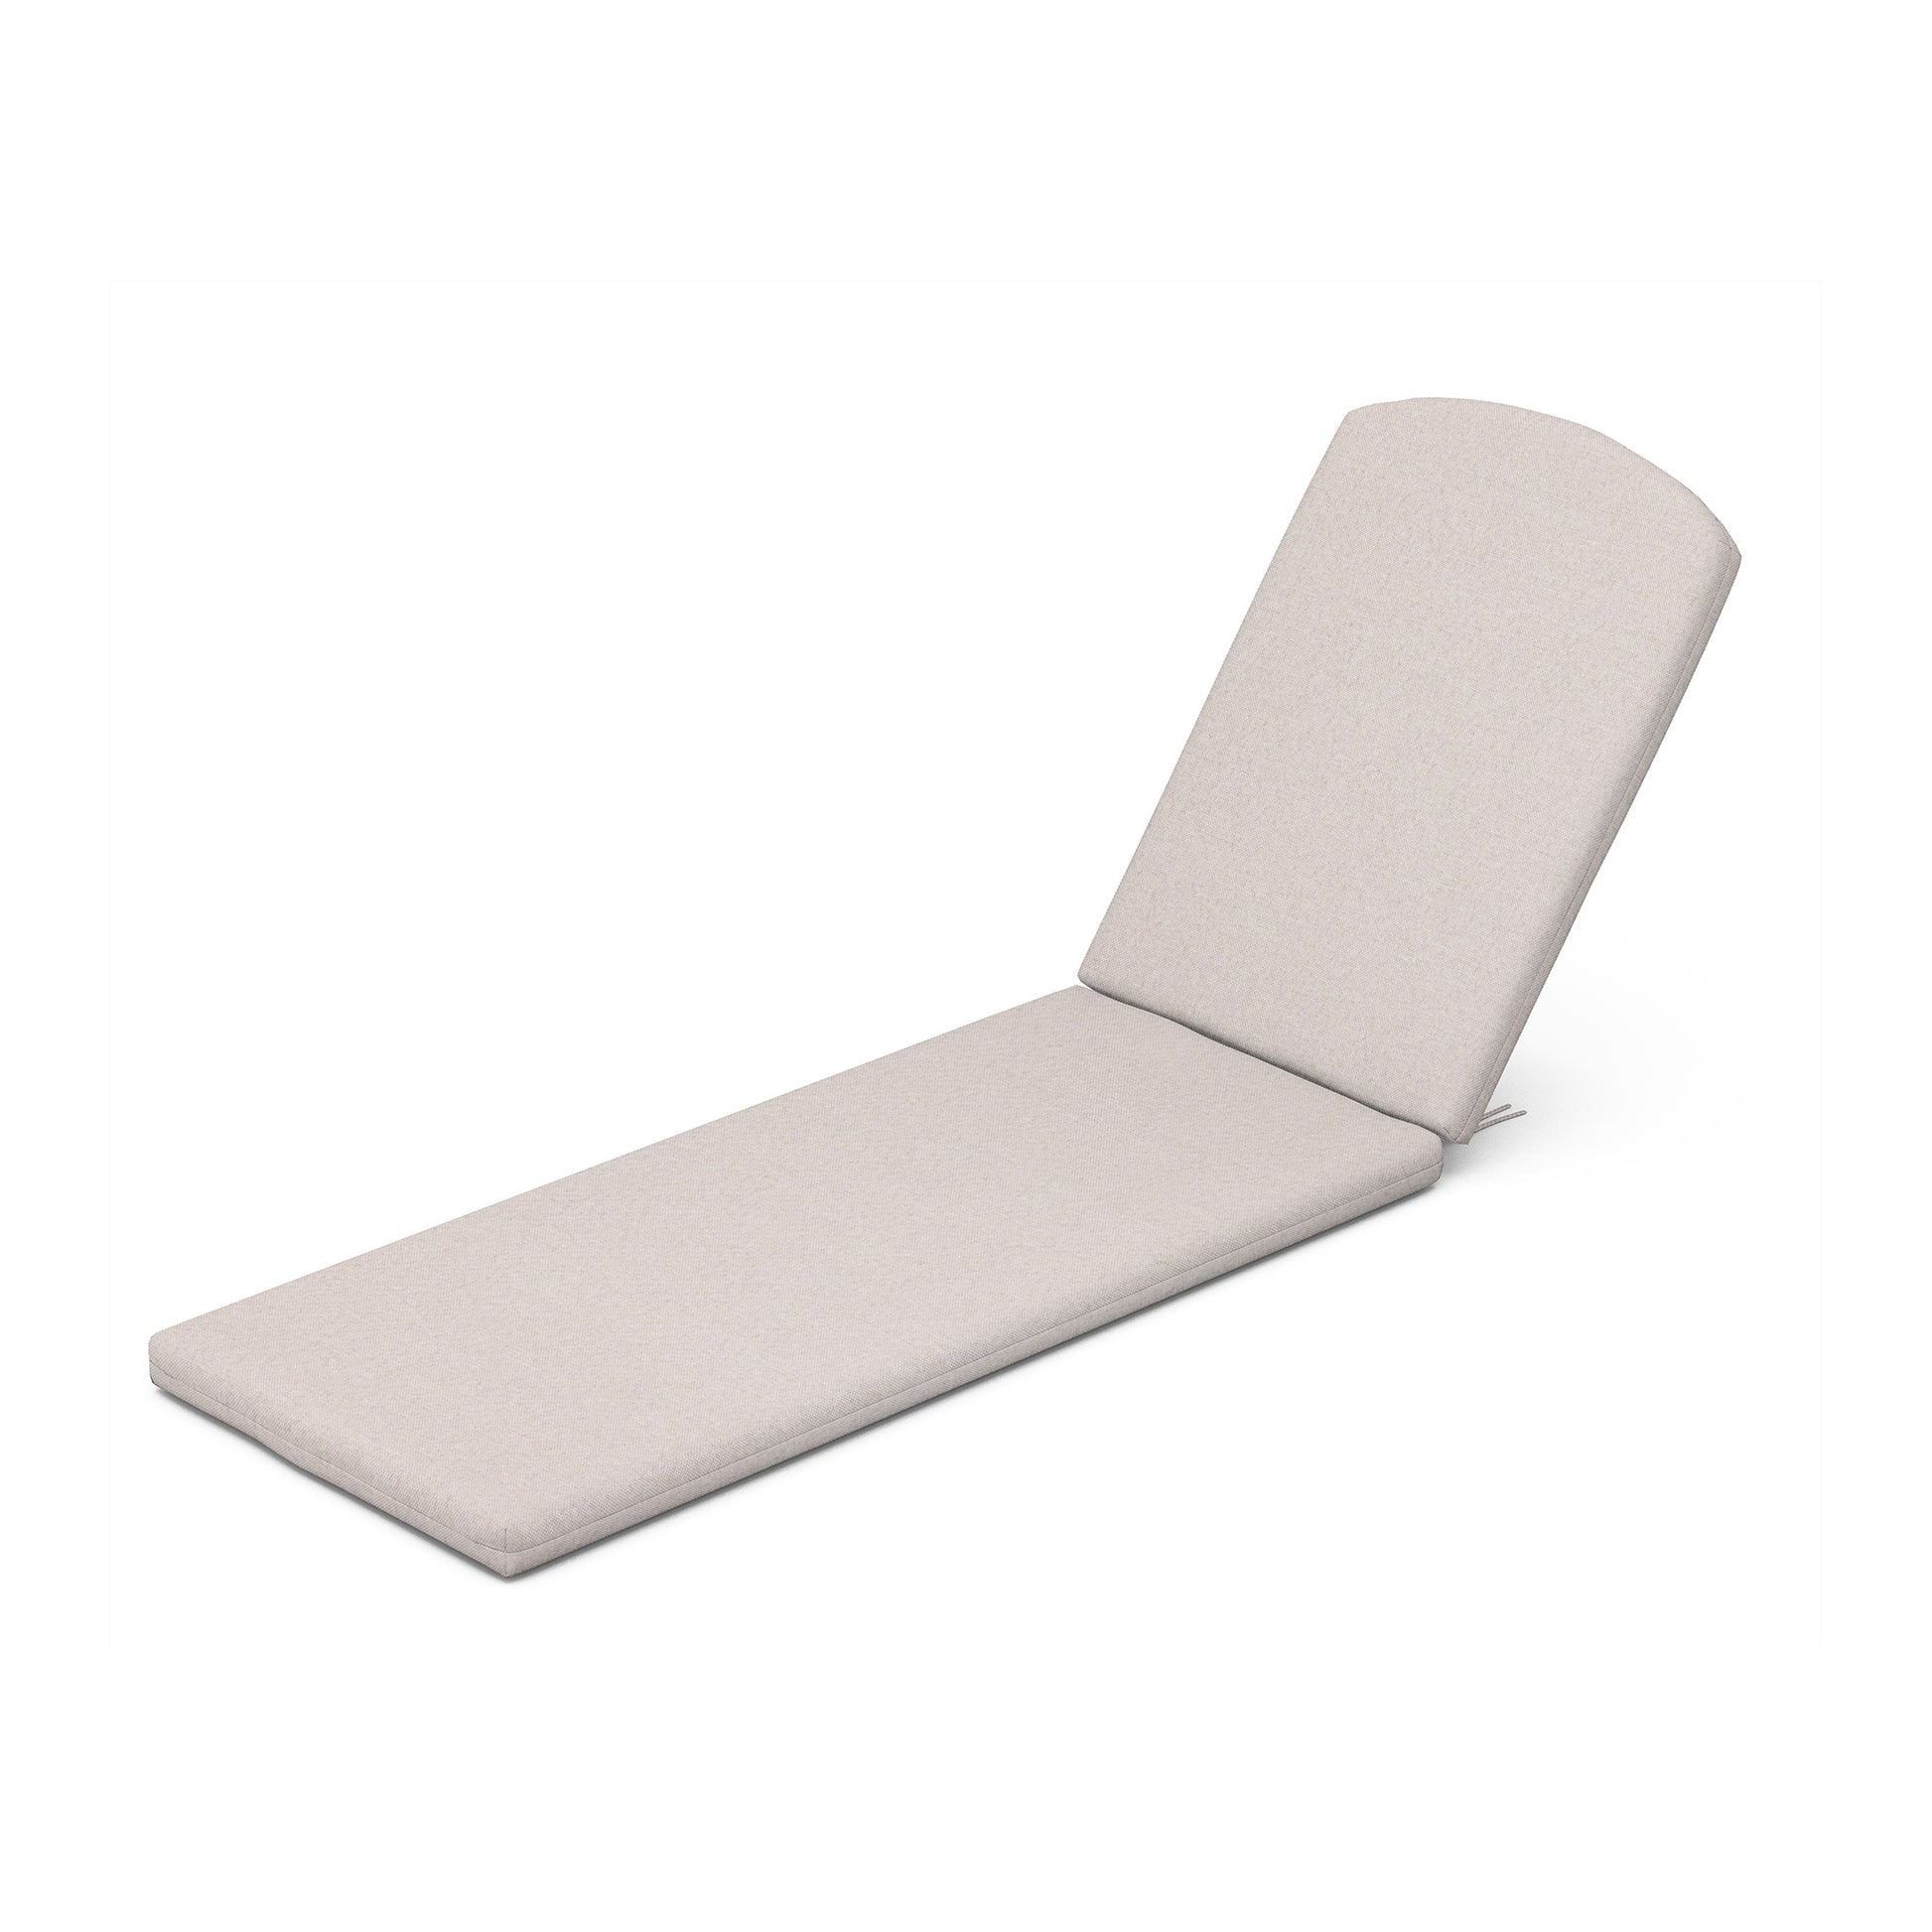 A weather-resistant beige chaise lounge on a white background, featuring comfort and durability with POLYWOOD XPWF0004 - Full Seat Cushions.